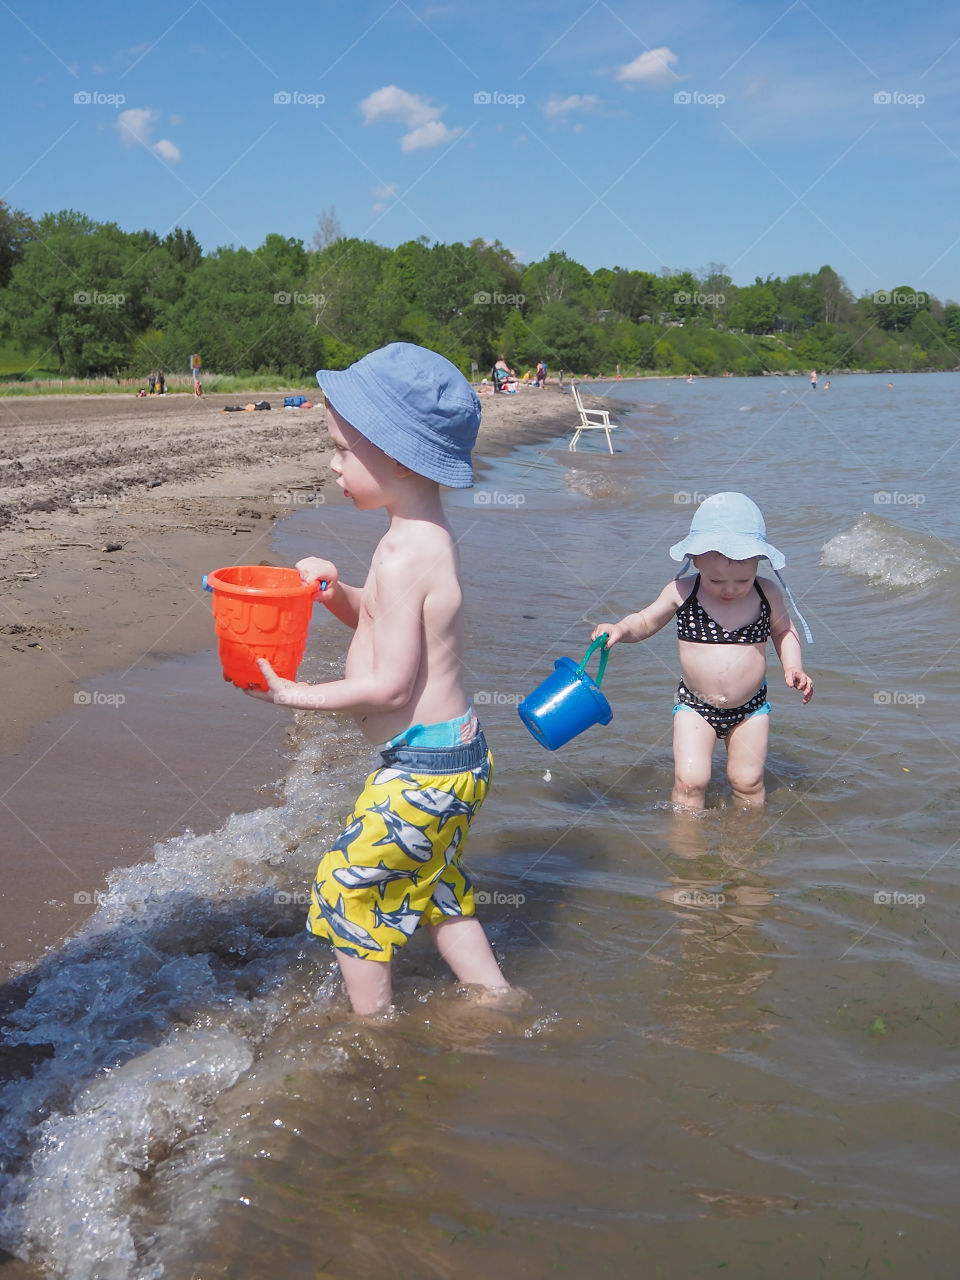 Brother & sister playing in the water at the beach shores of Port Burwell, Ontario, Canada.